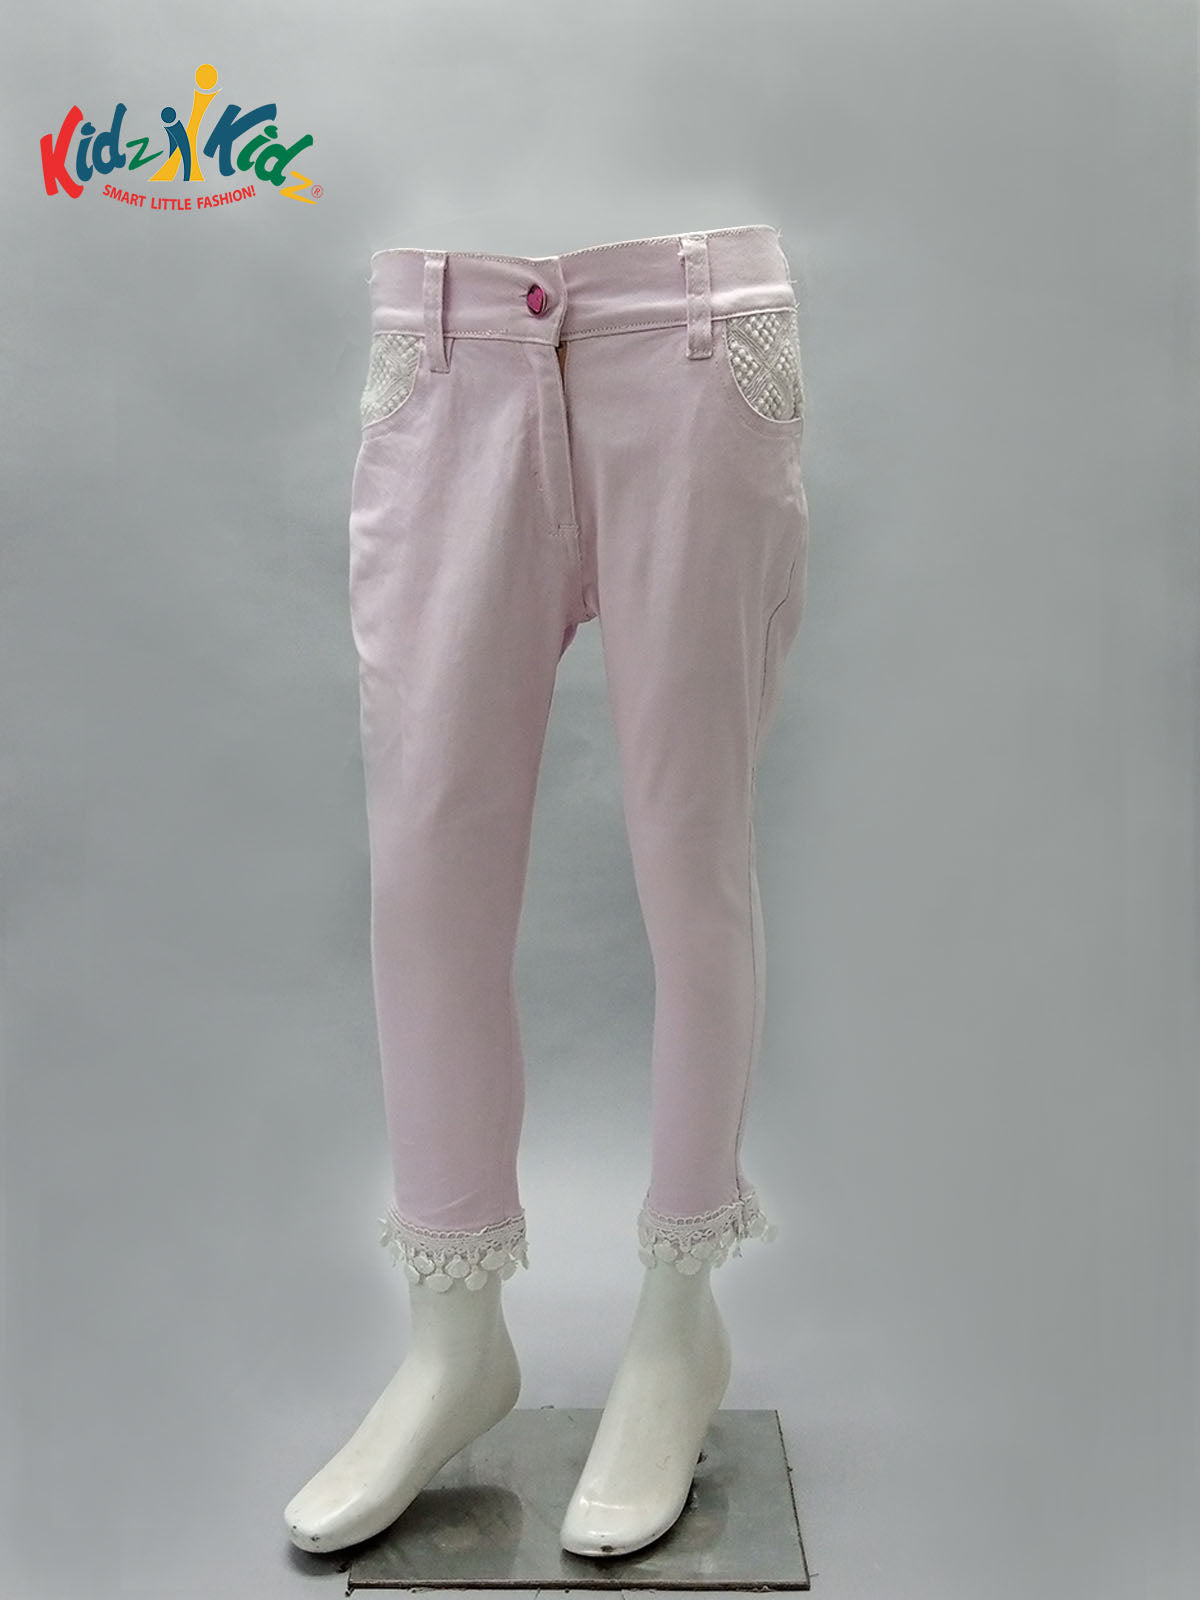 https://cdn.shopify.com/s/files/1/0013/9326/2680/products/AAGCP1780LPINK_2.jpg?v=1613801057